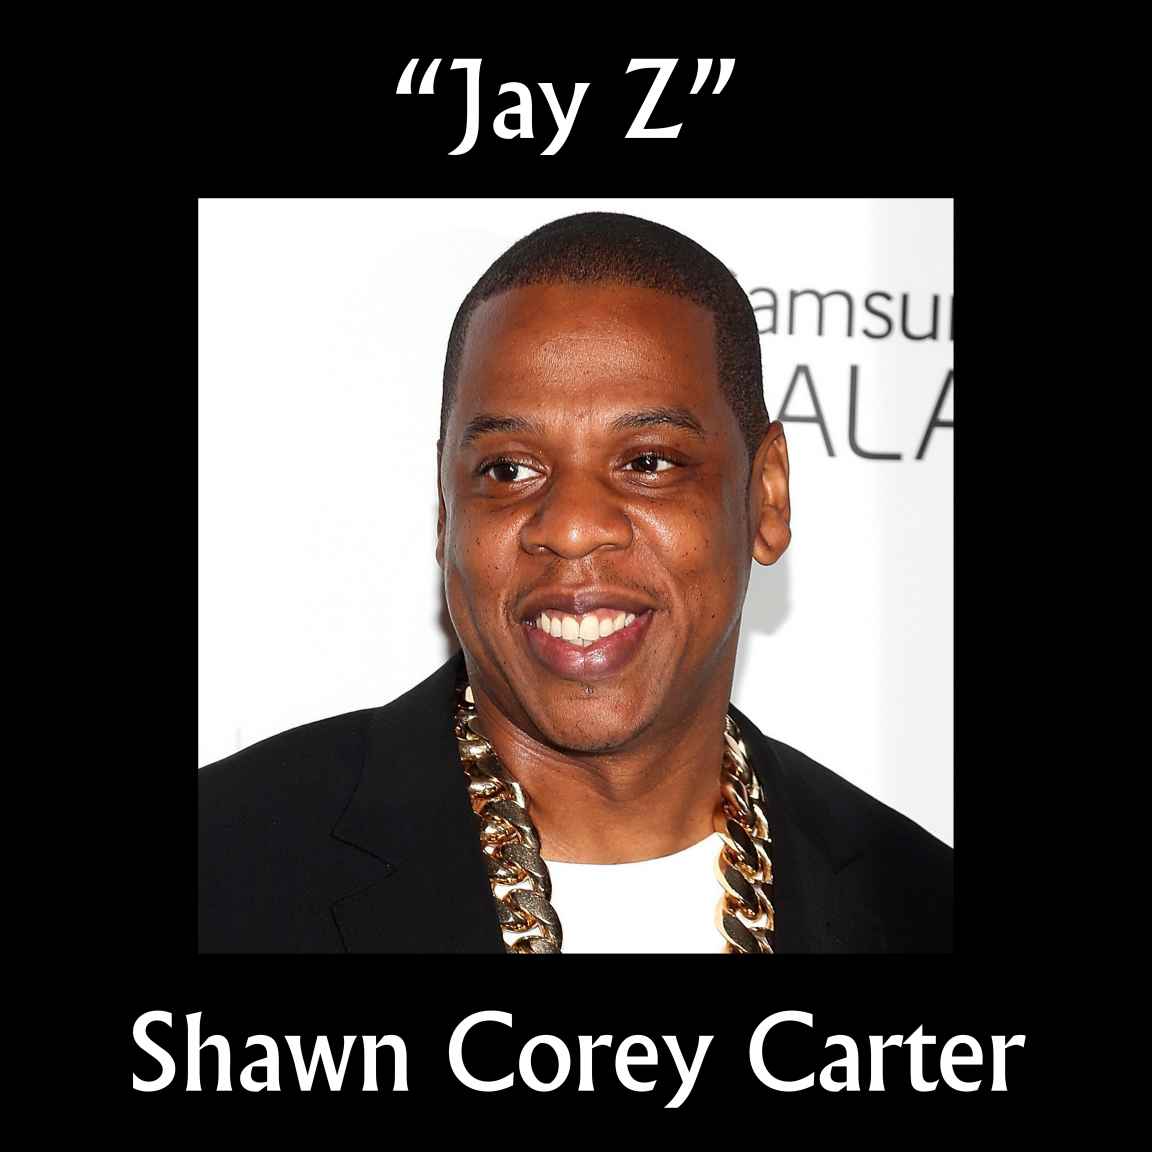 25 of Your Favorite Celebrities Given Names!